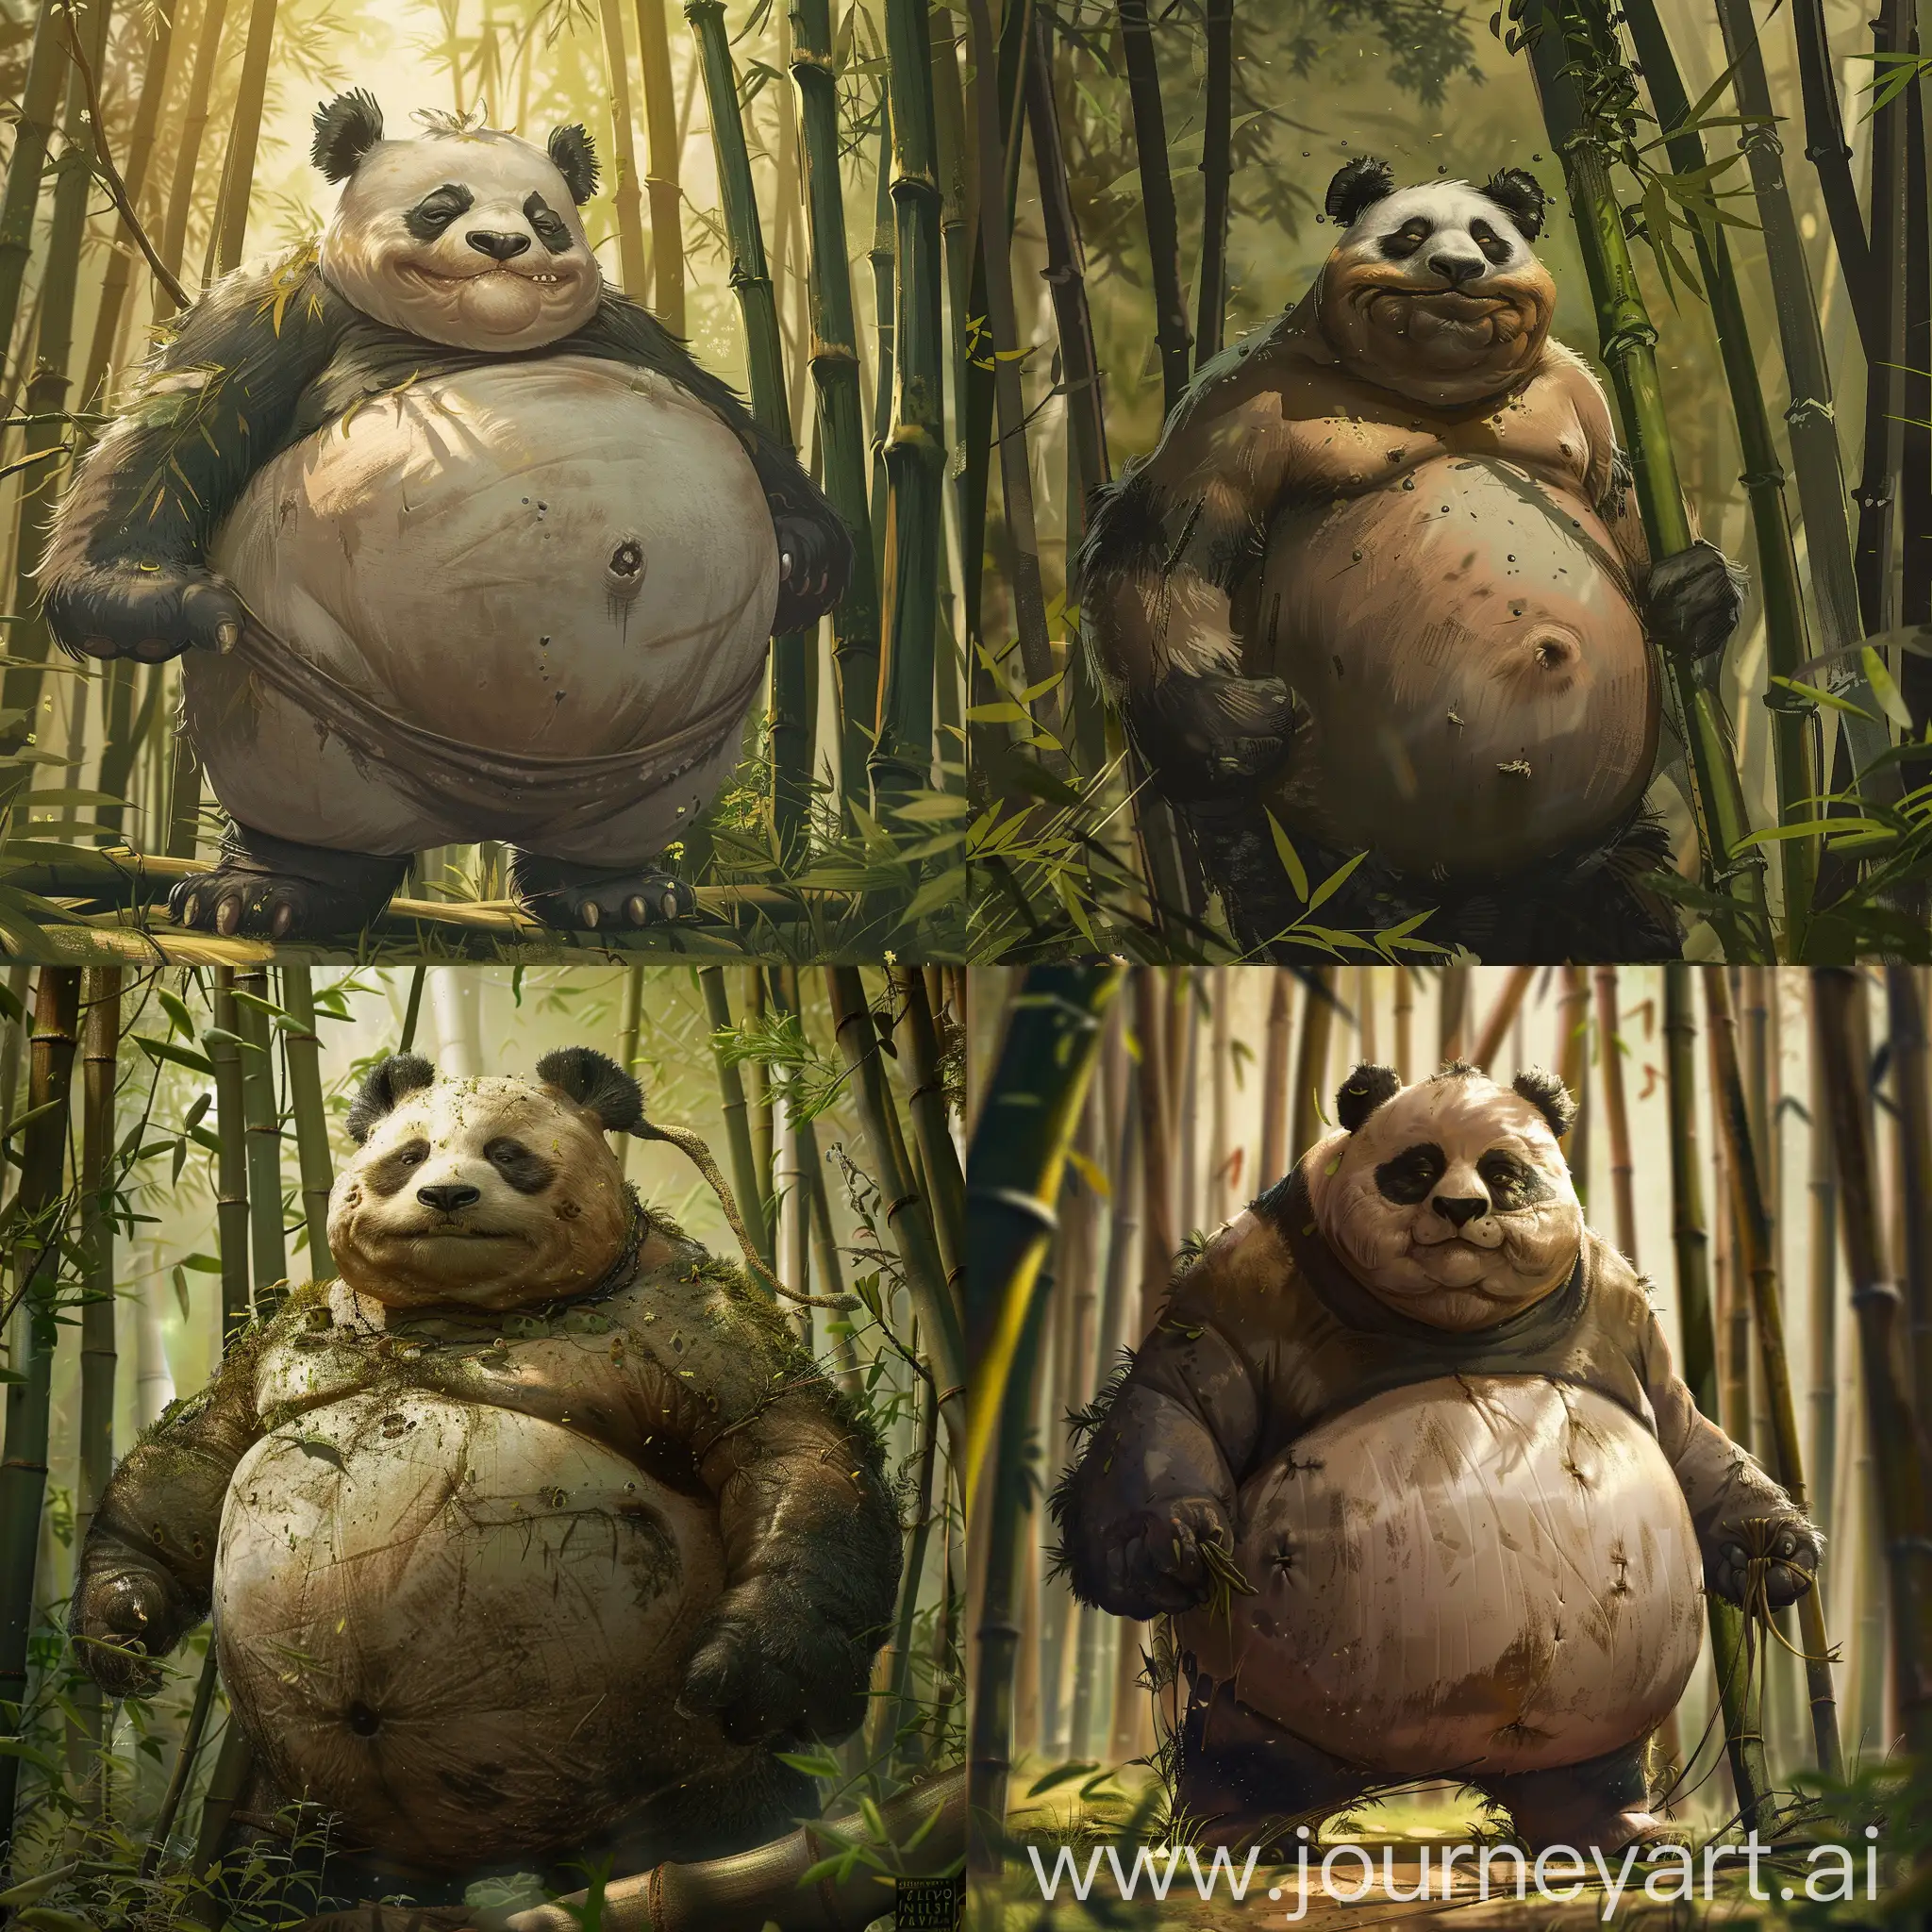 an extremely fat man with a panda head called pendo in a bamboo forest